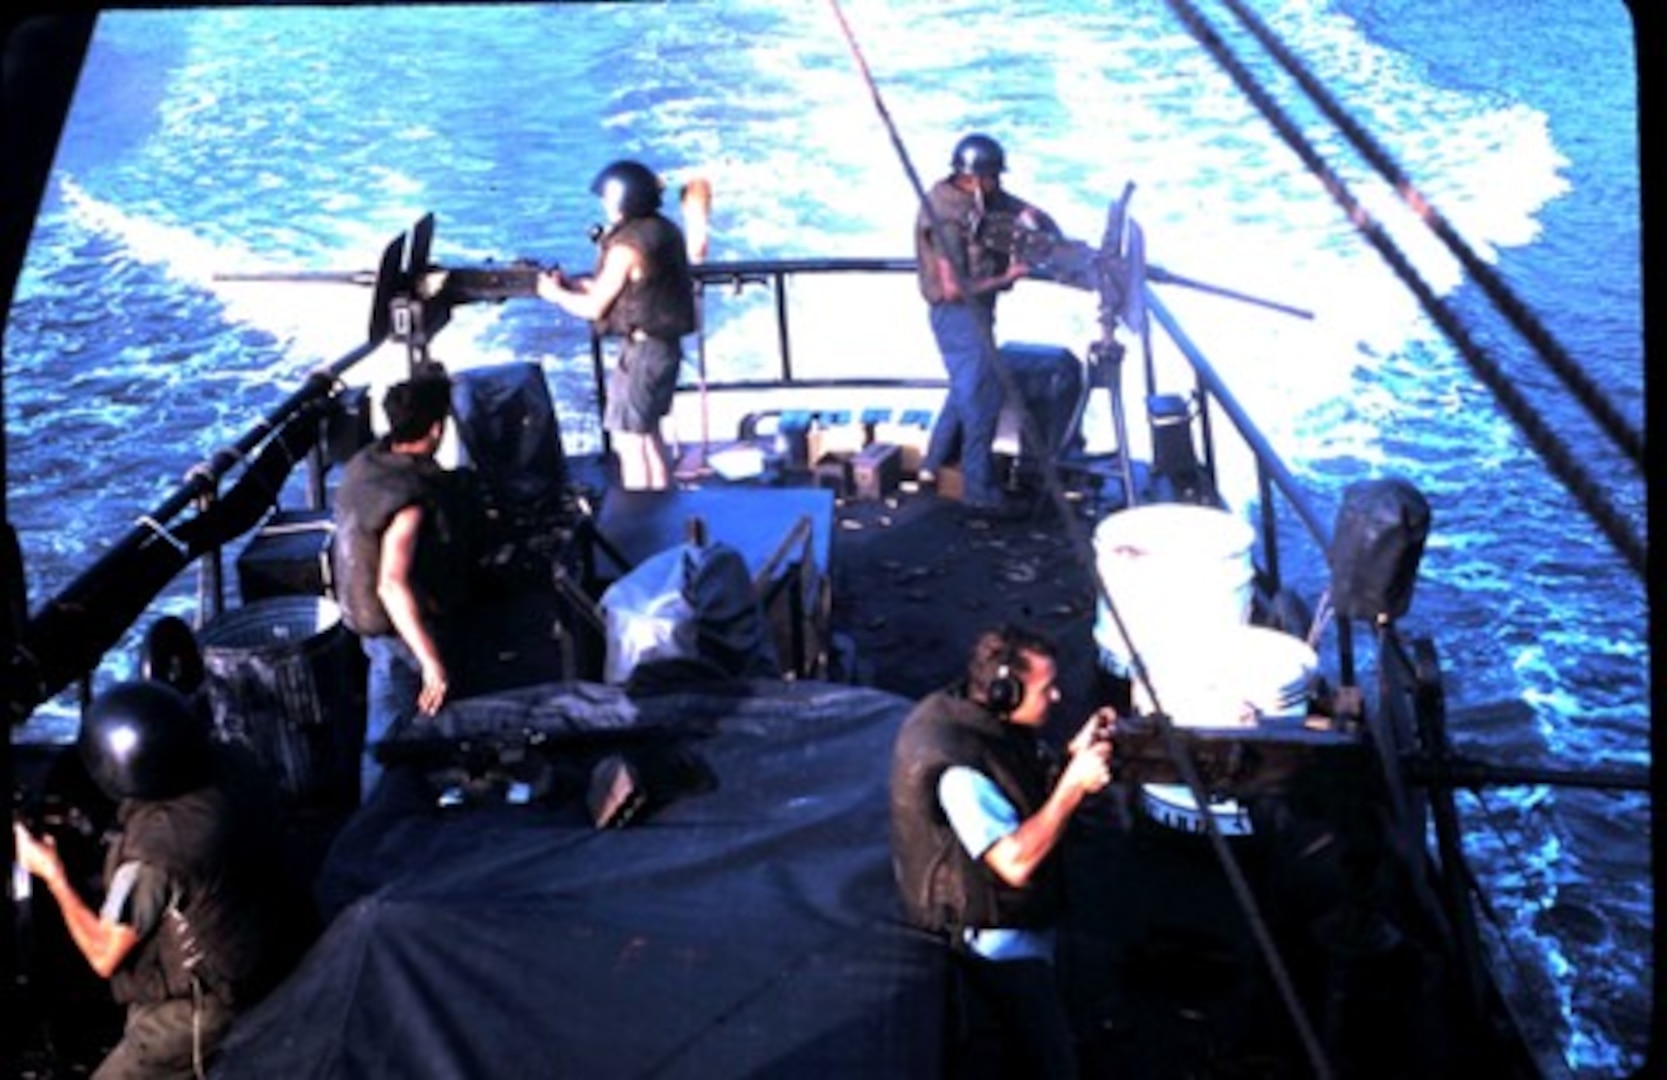 Fantail of the Point Banks showing the .50 caliber machine guns used to cover Villareal’s nighttime extraction mission. (U.S. Coast Guard)